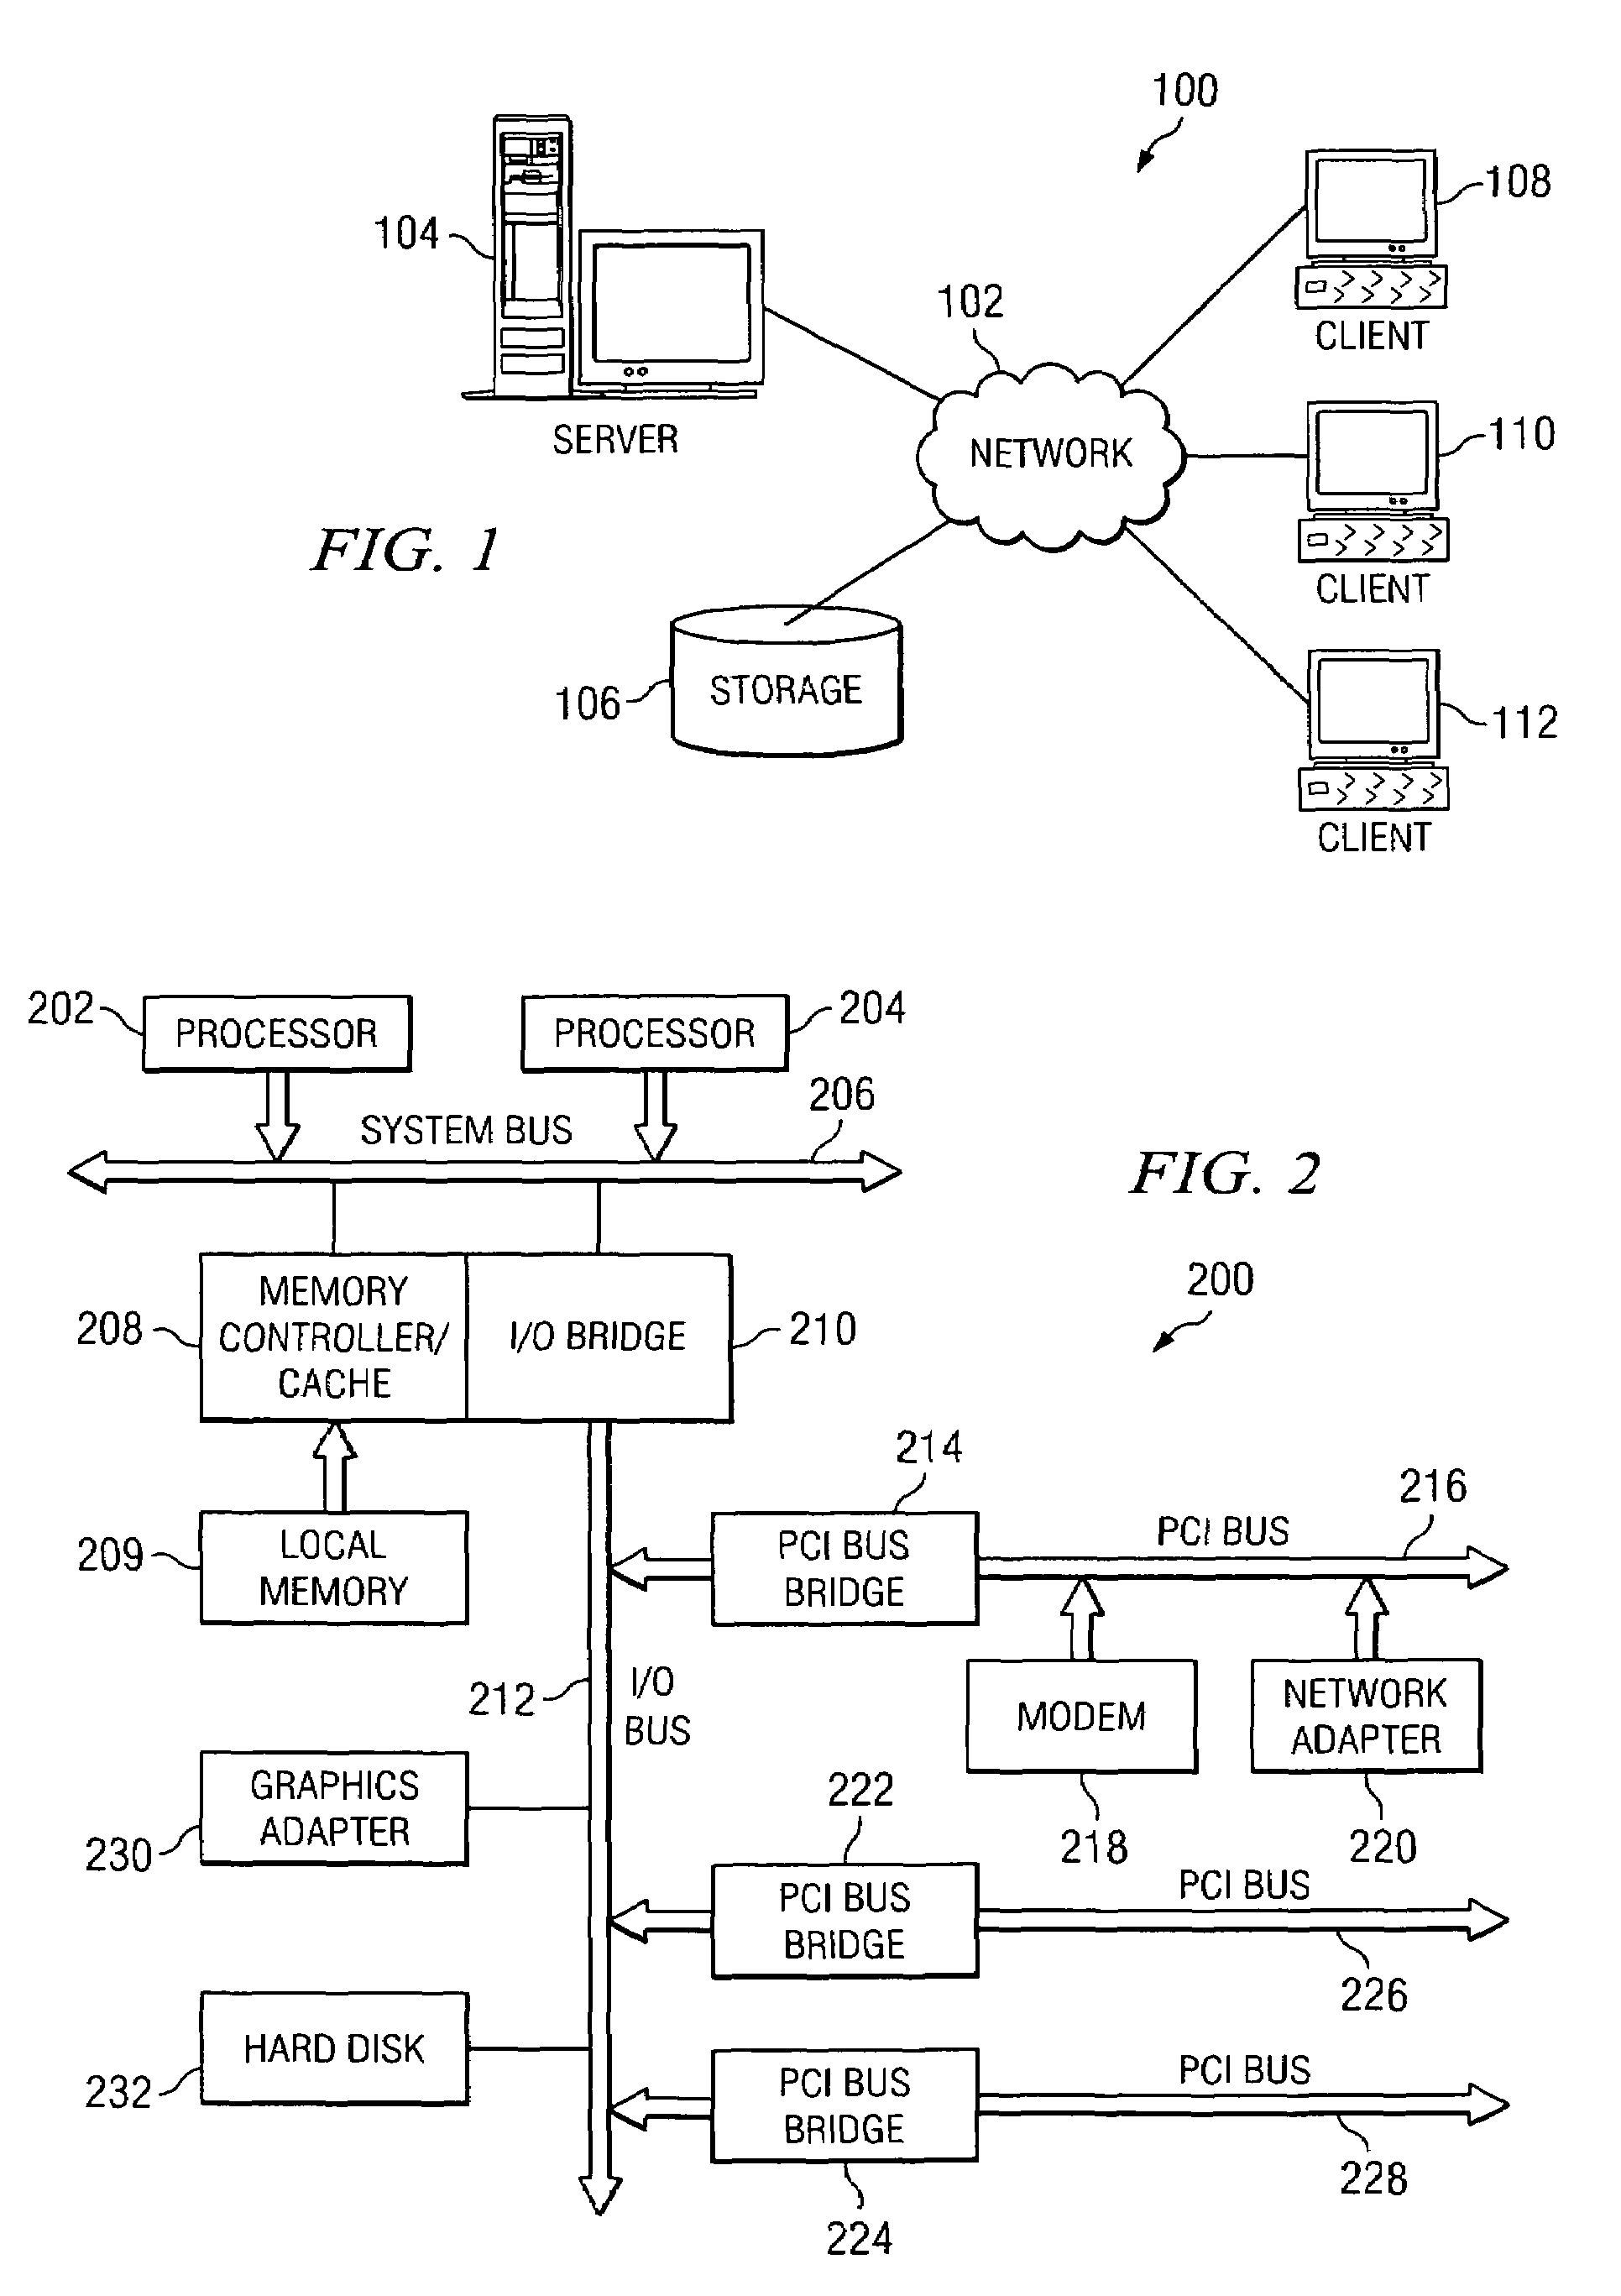 Method and apparatus for defining and instrumenting reusable java server page code snippets for website testing and production